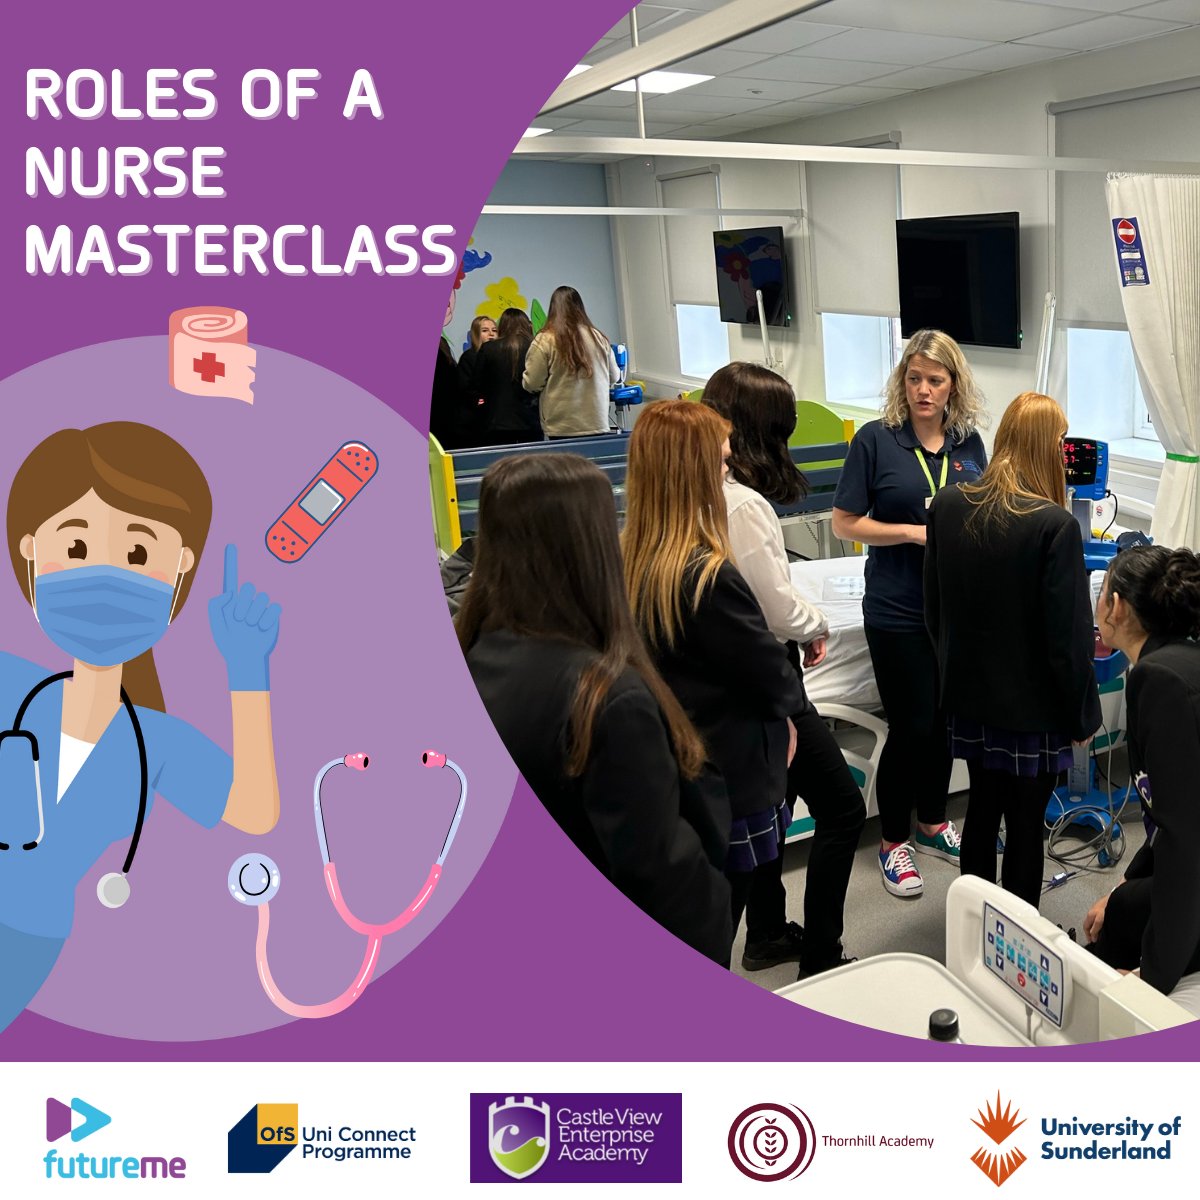 On Tuesday 5 March, we welcomed students from Castle View Enterprise Academy & @thornhill_uk visited @sunderlanduni campus for a masterclass on exploring the roles of a nurse. Students participated in activities in a mock ward, such as placing organs & measuring blood pressure.